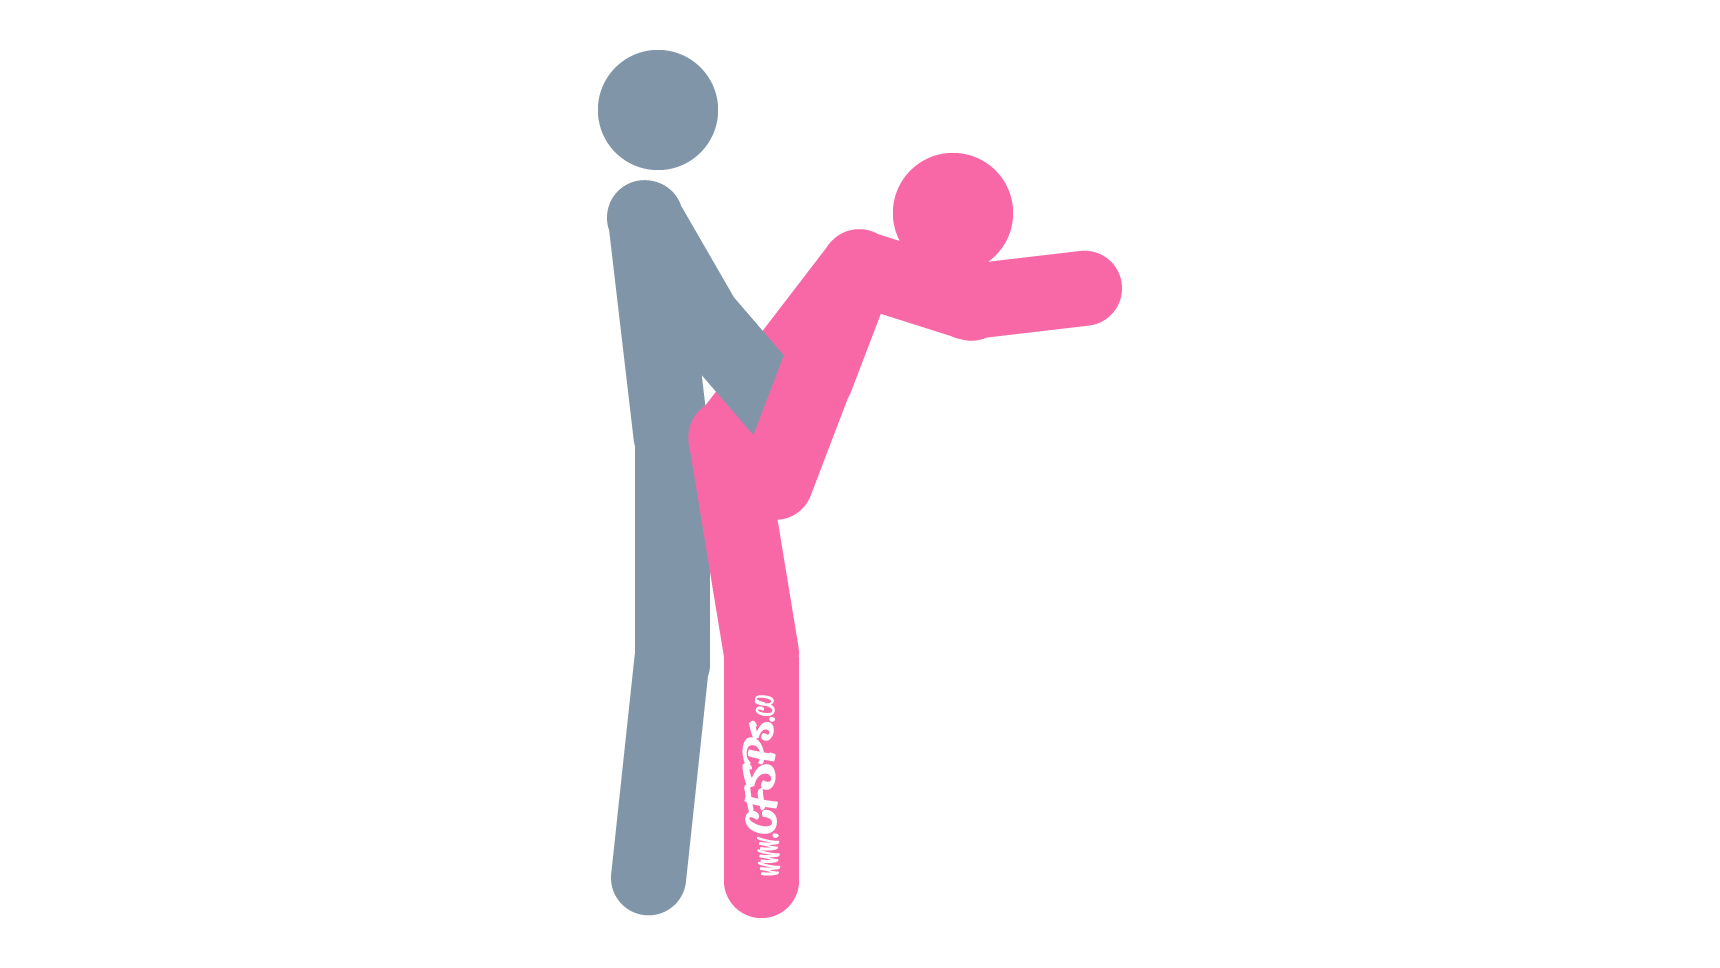 This stick figure image depicts a man and woman having sex in the Assist sex position. The woman is standing and leaning forward a little with one hand on the wall supporting her. The man is standing behind her with his pelvis pressed against her butt.